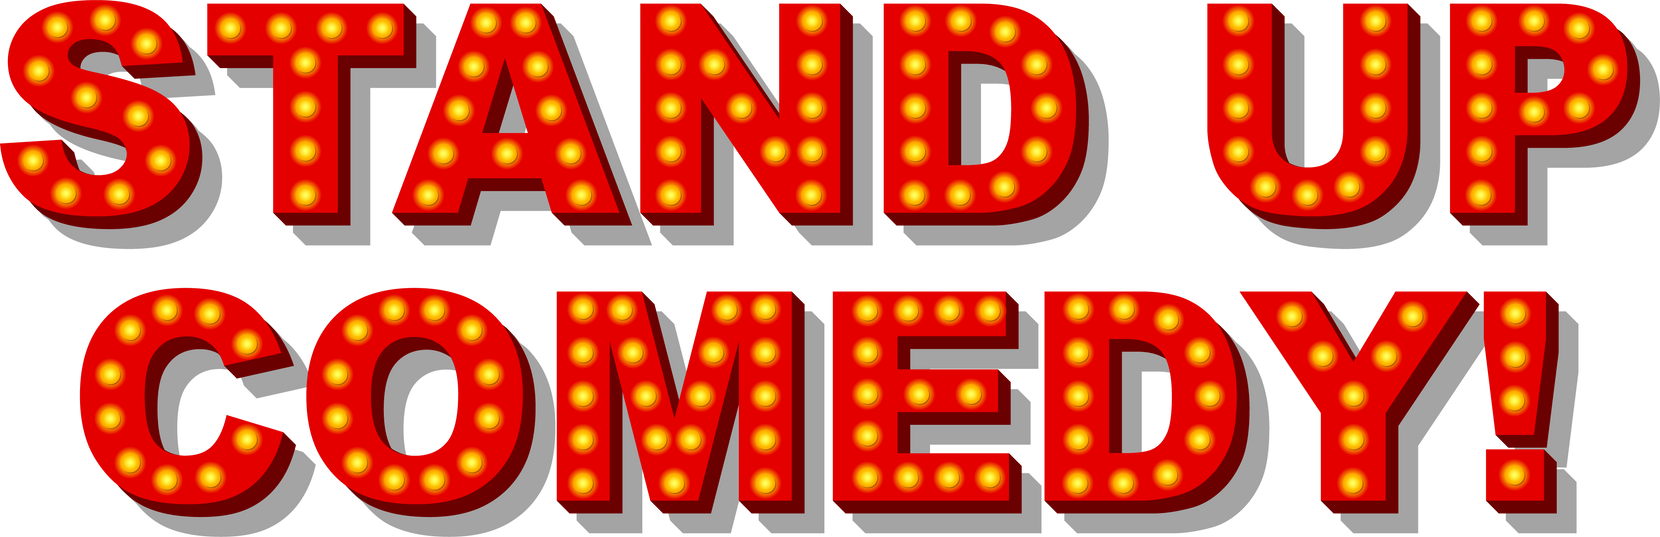 Stand up Comedy Banner Design